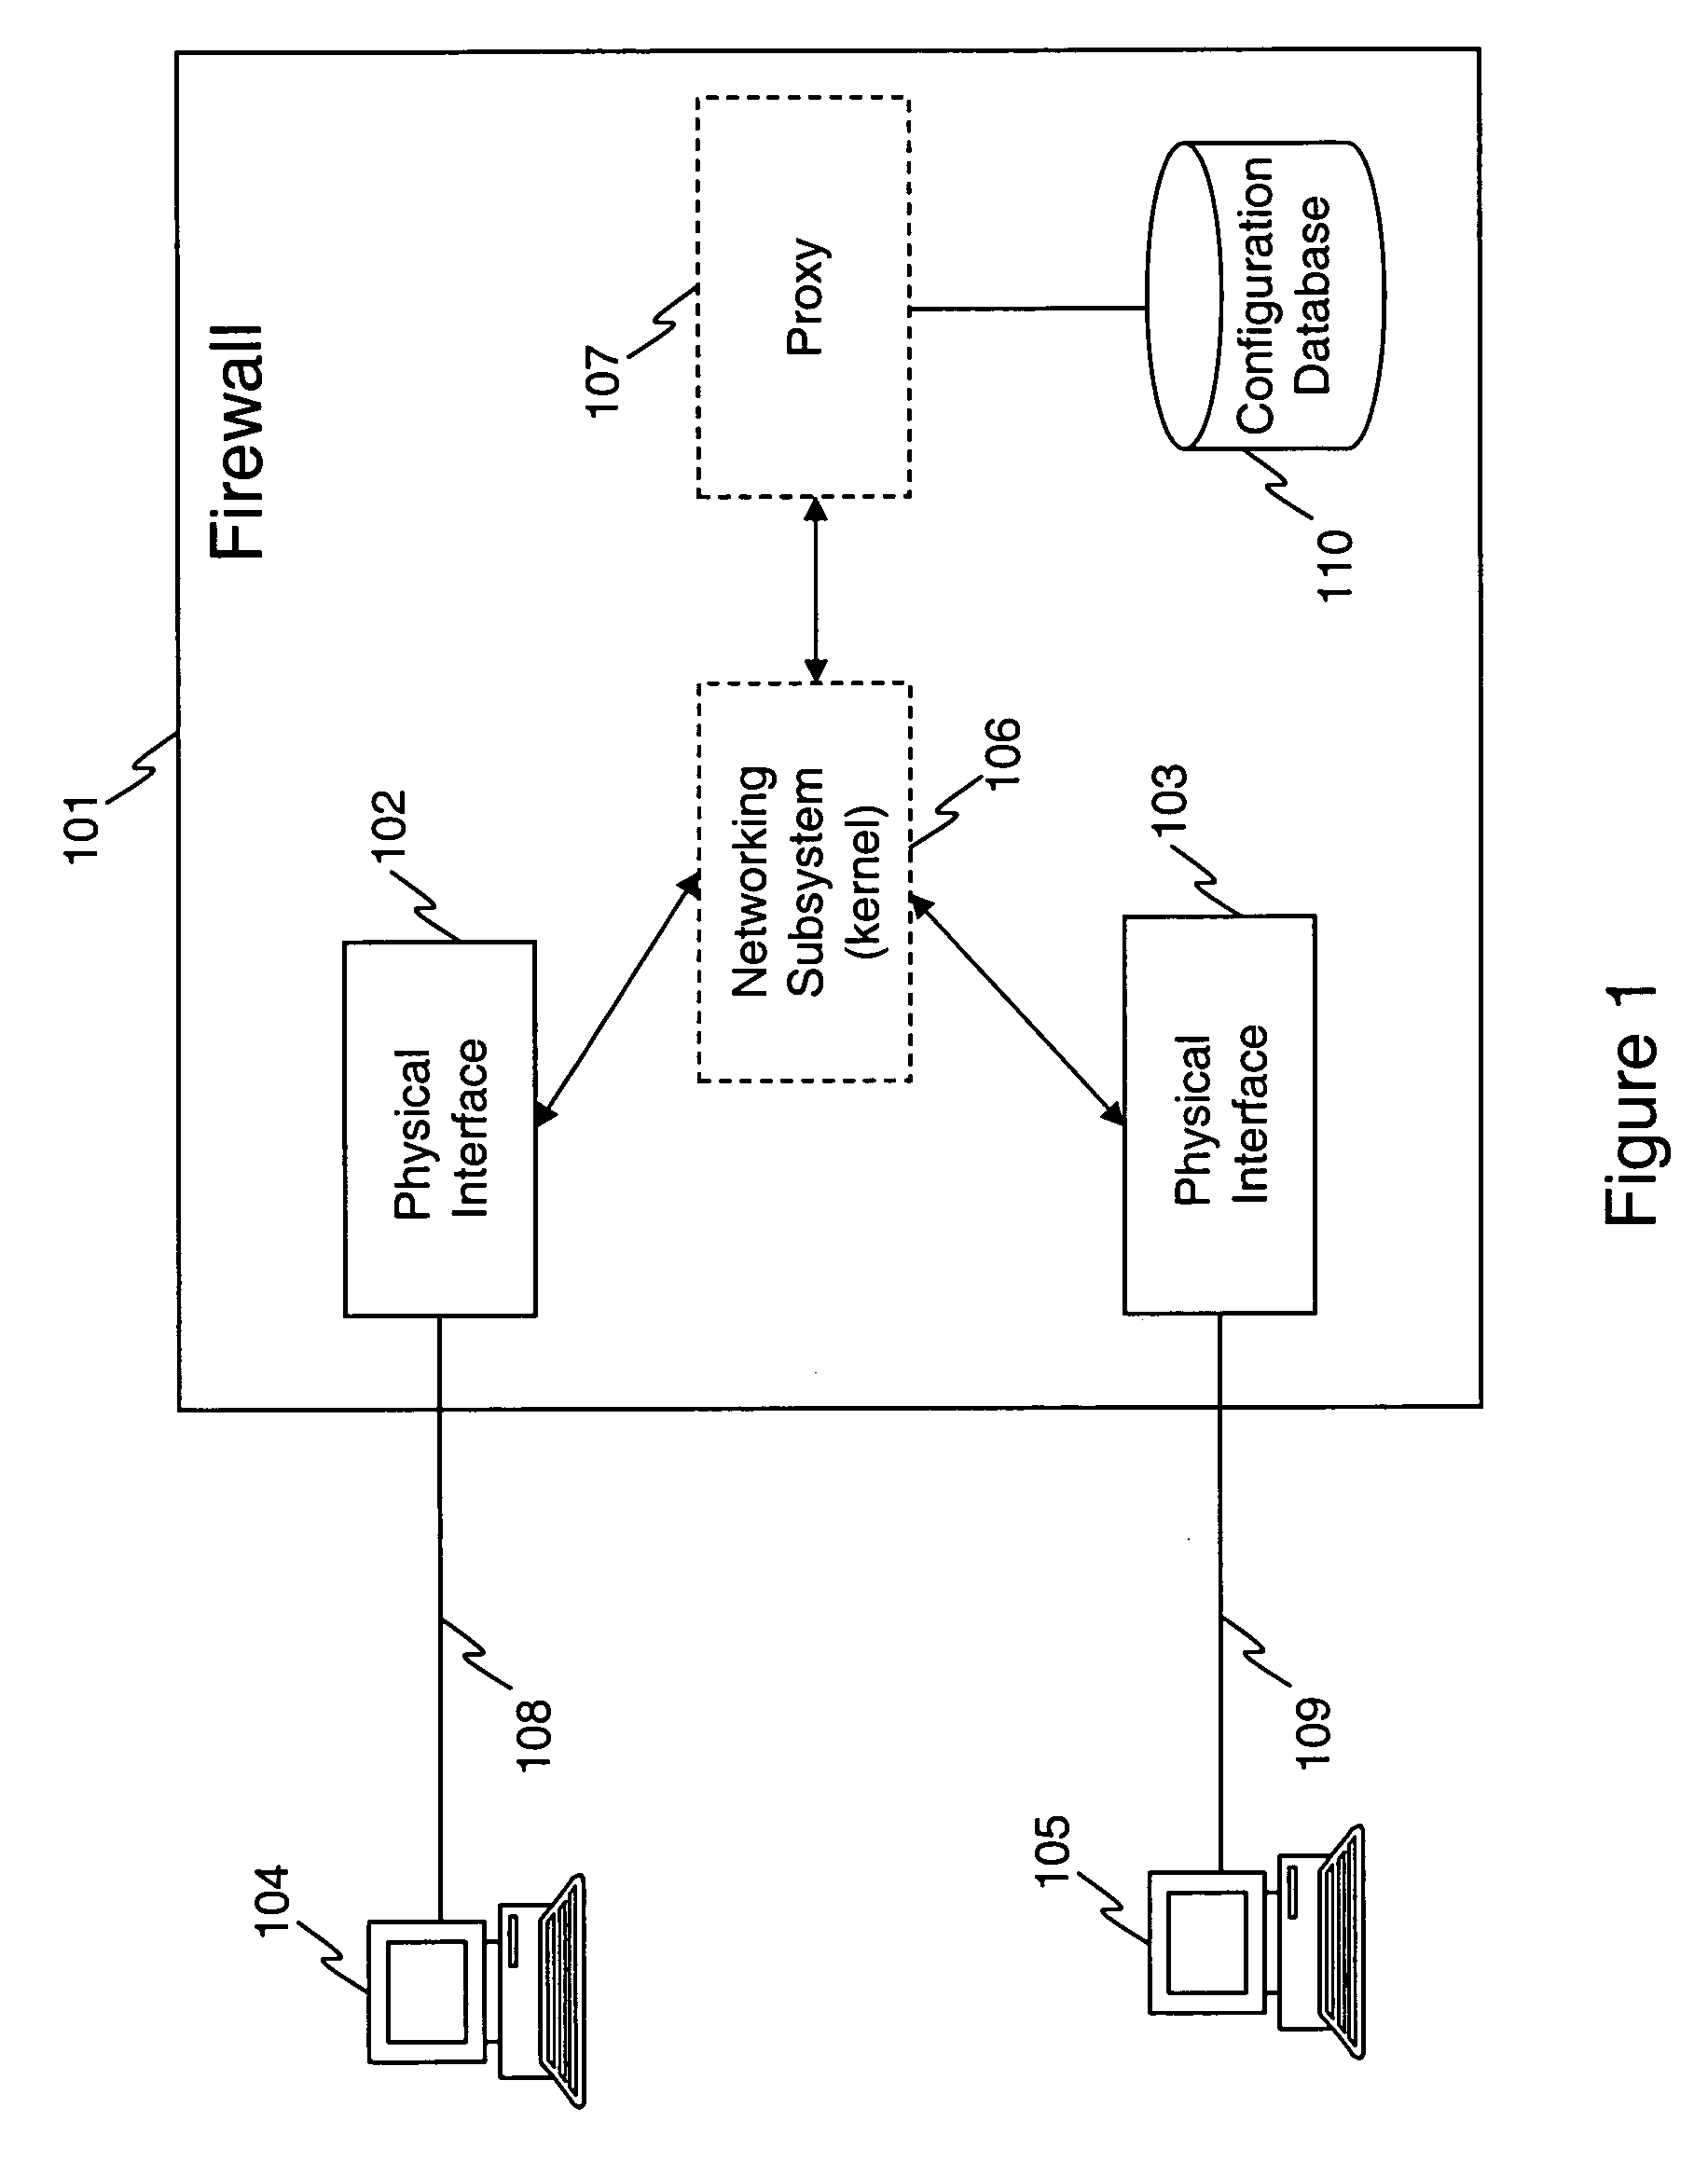 Computerized system and method for policy-based content filtering